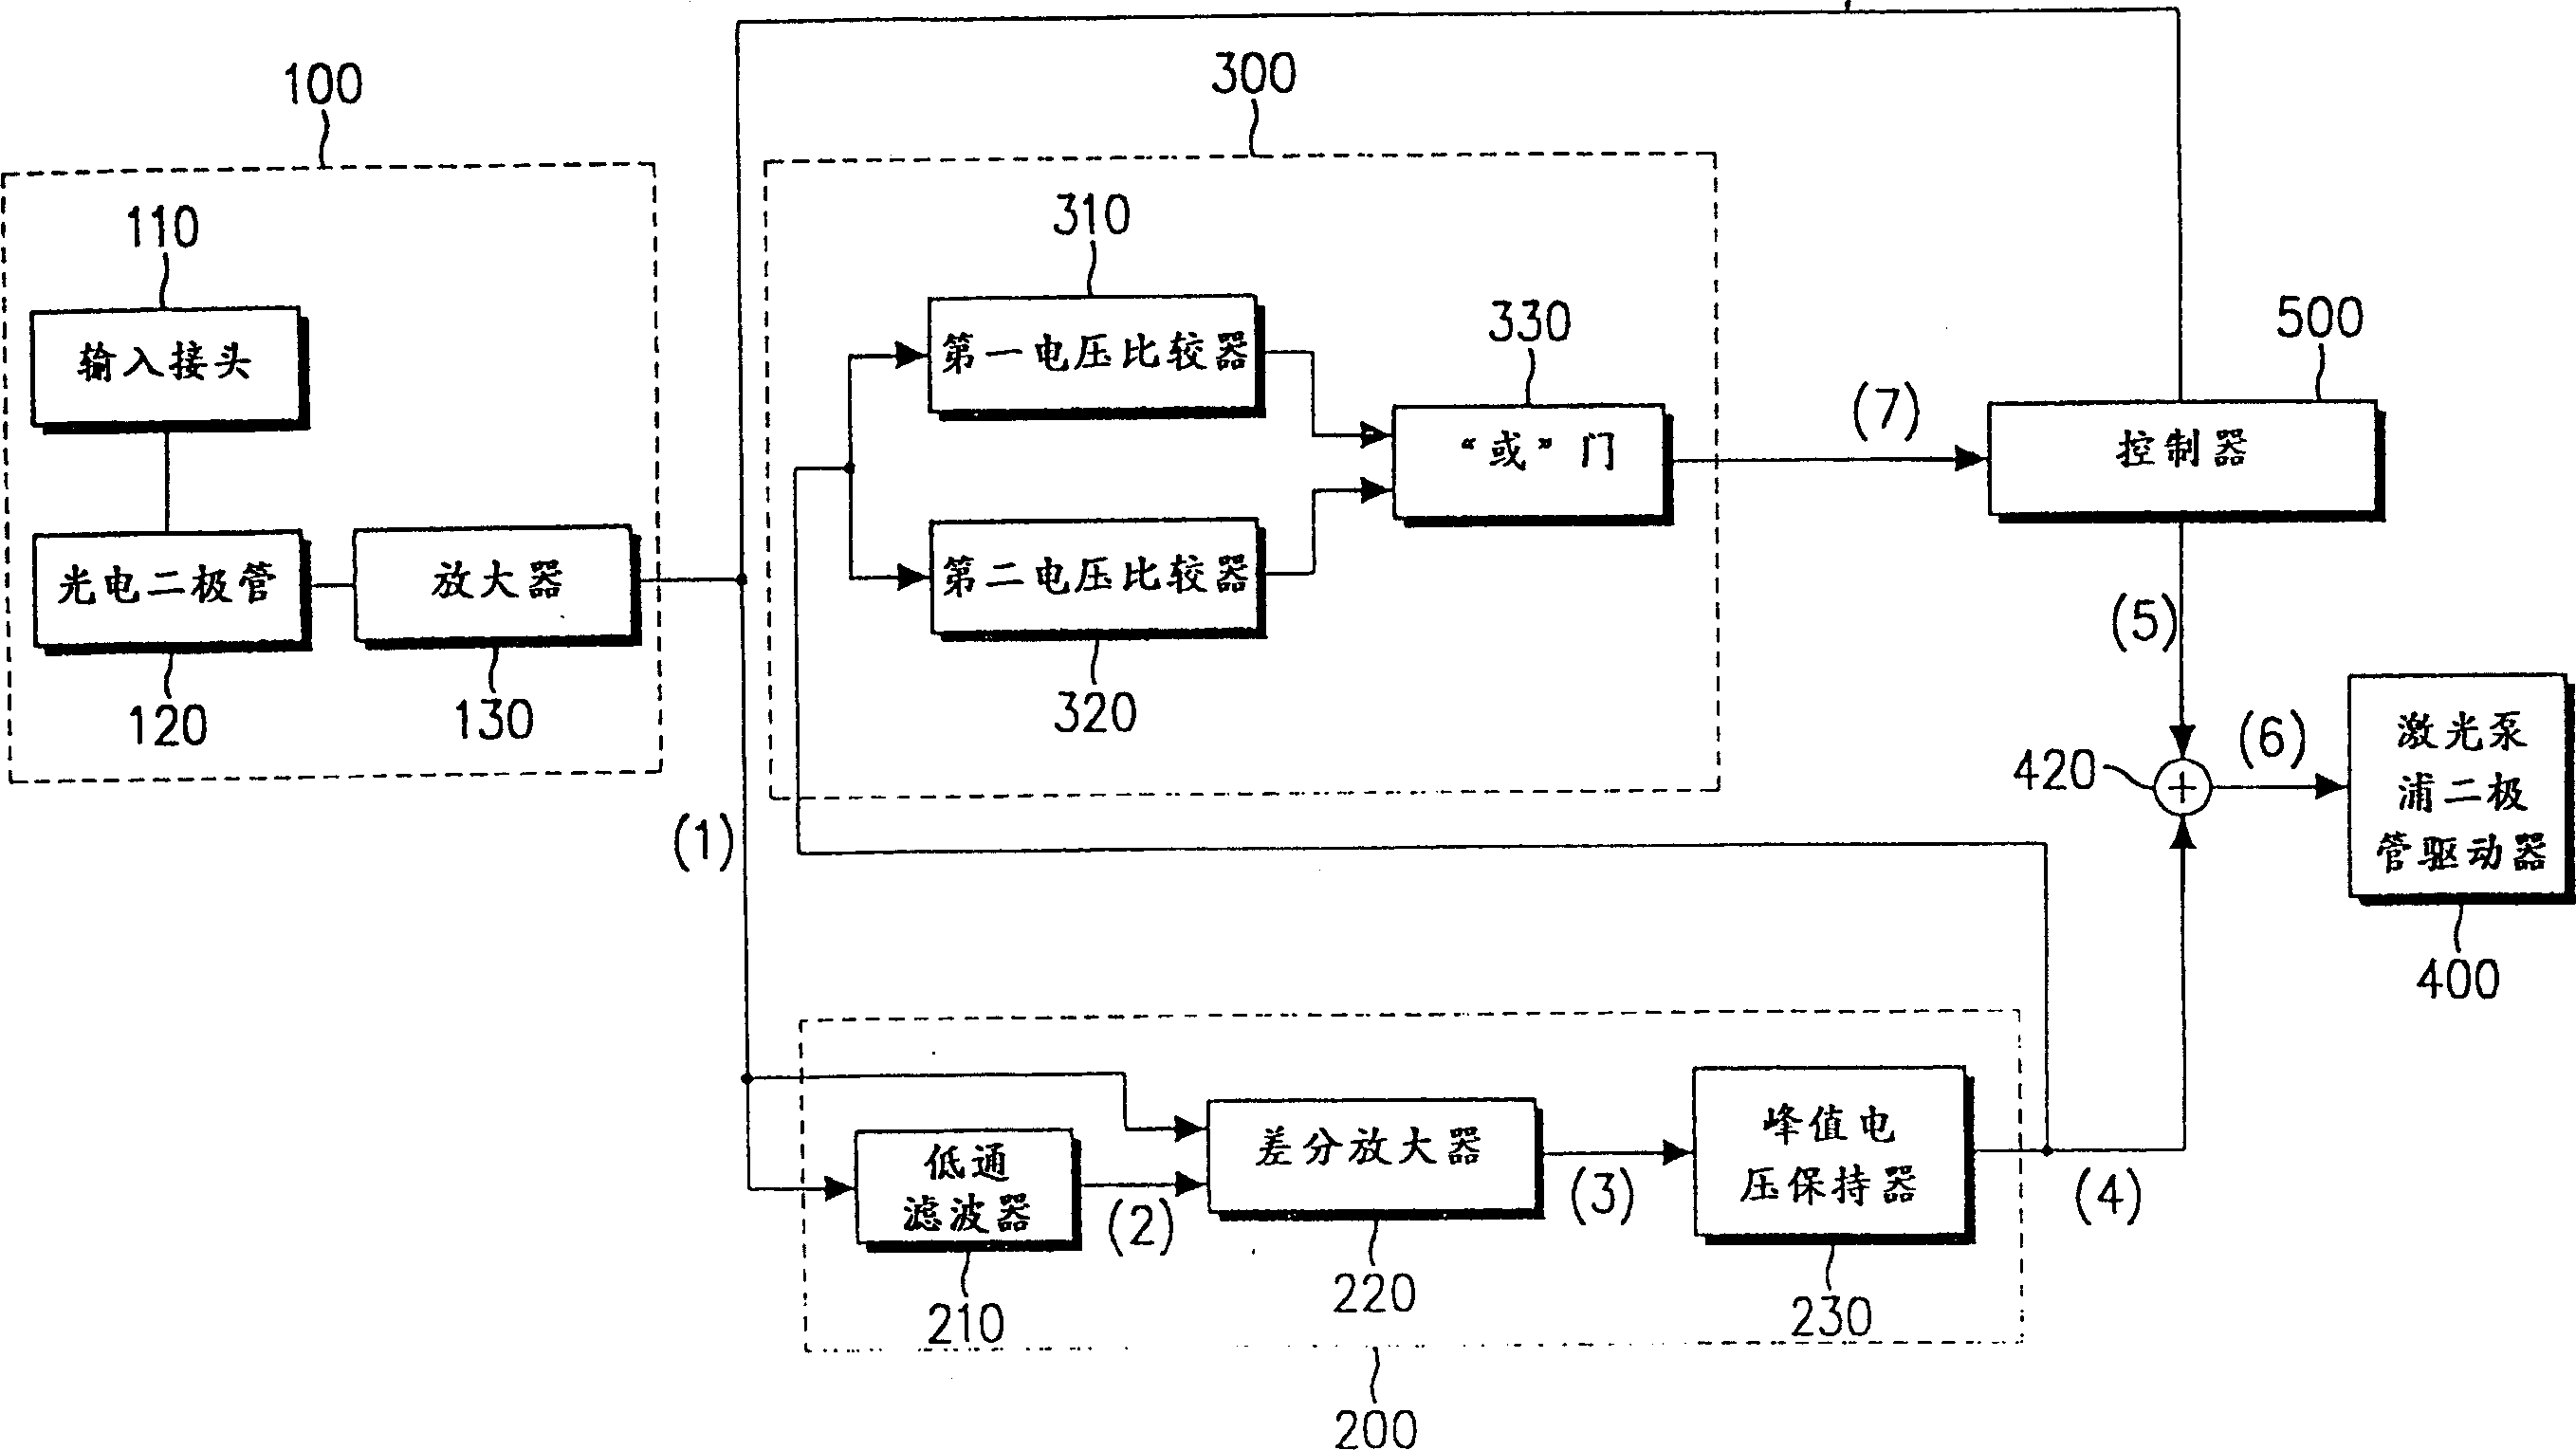 Transient effect inhibitor for optical fiber amplifier in WDM system